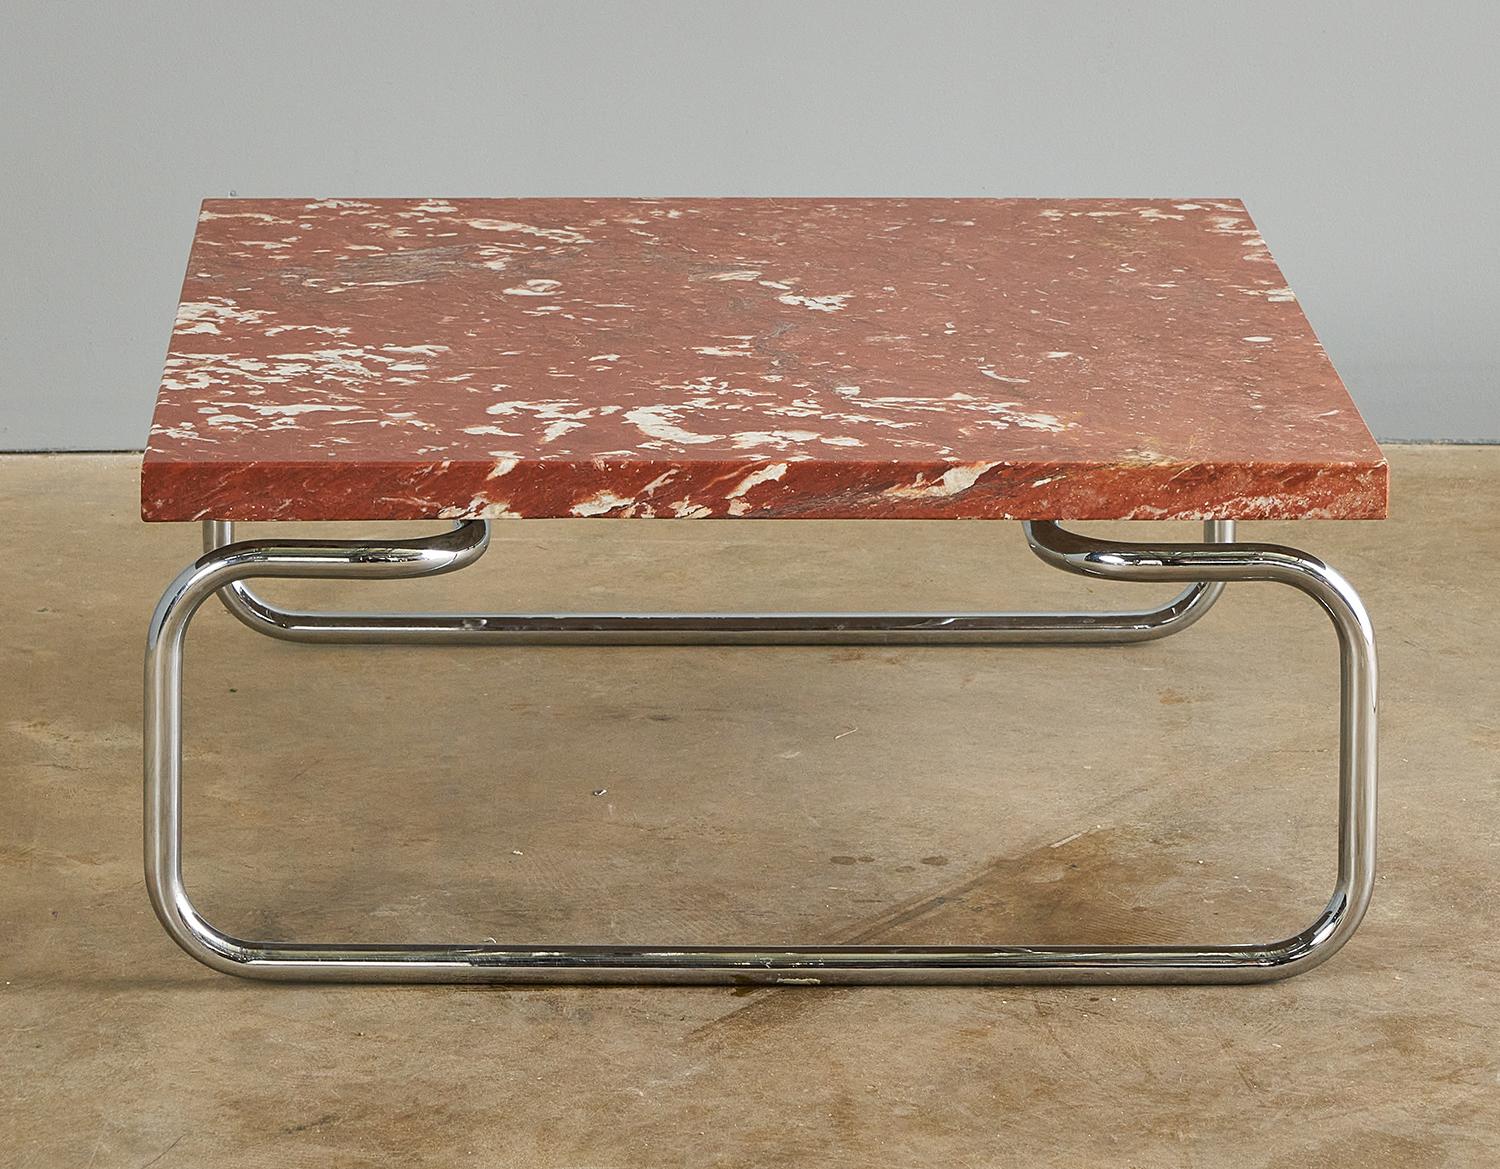 Gorgeous Rouge Marble and Chrome Coffee Table by Michael Mccarthy for Cassina. Marble retains it's original label from the stone supplier, a charming detail on this very hefty piece of history. Very good, near excellent, vintage condition.  